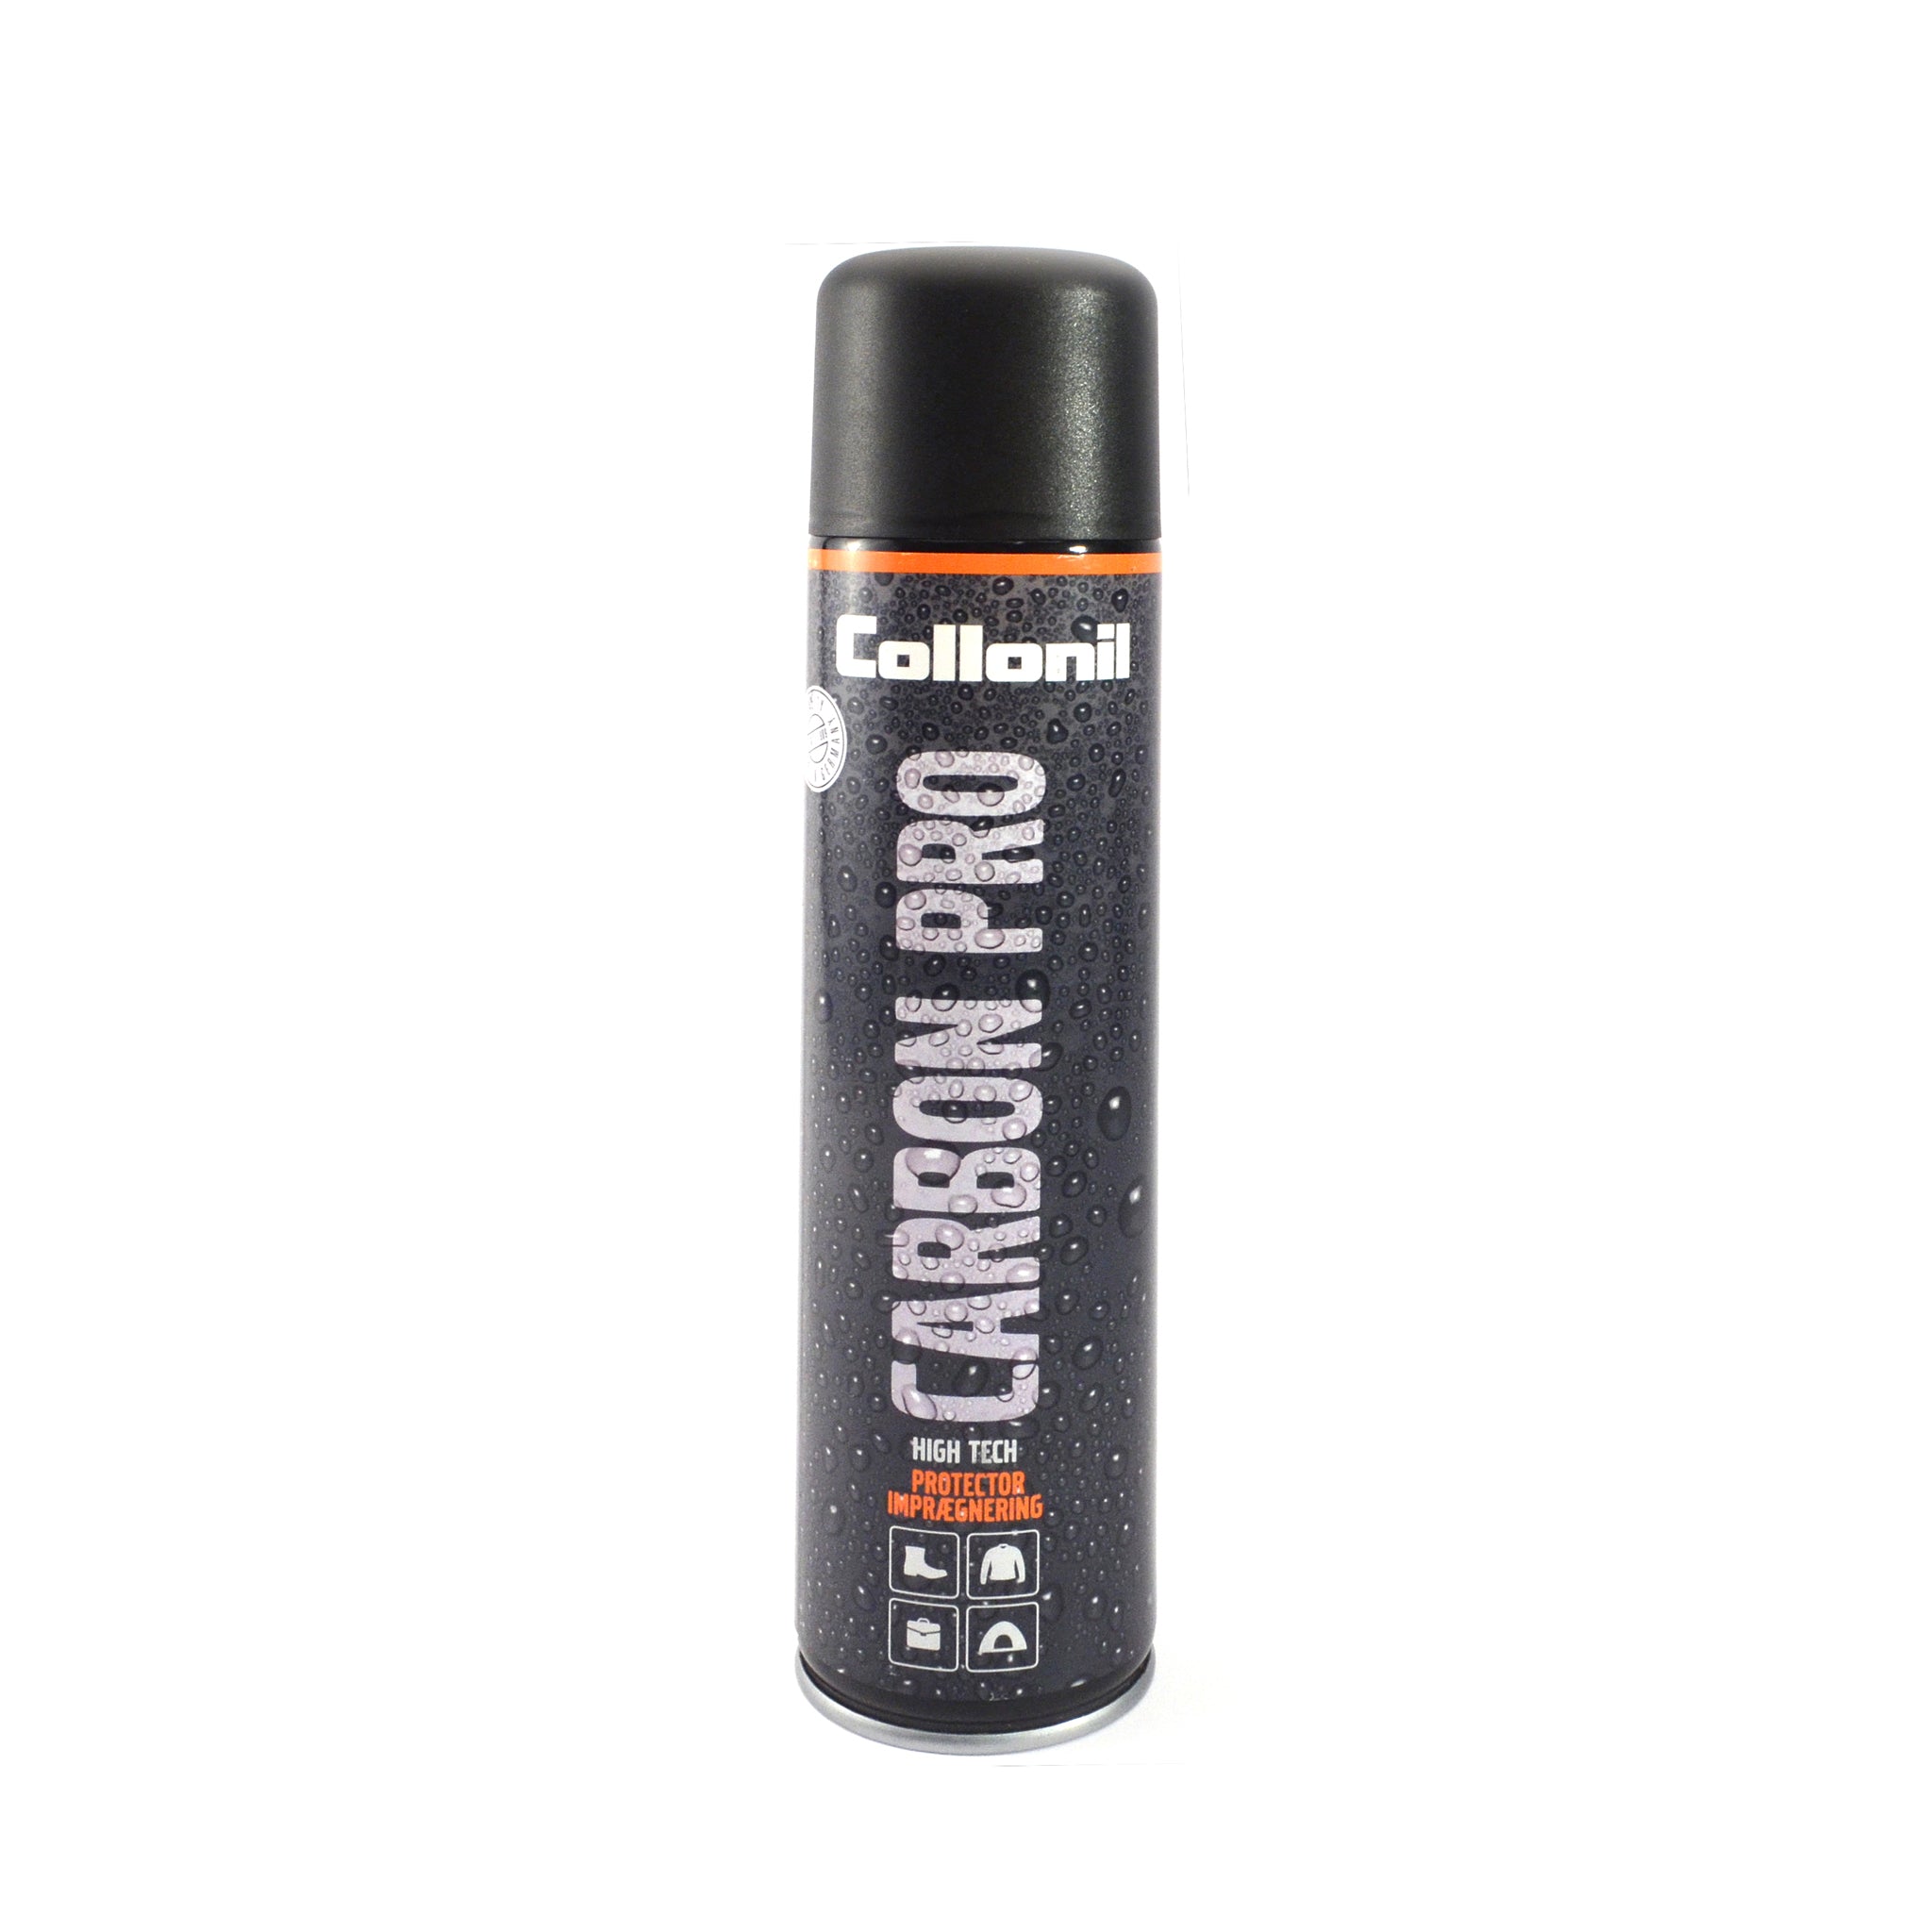 Collonil Carbon Pro Spray from Identity Leathercraft